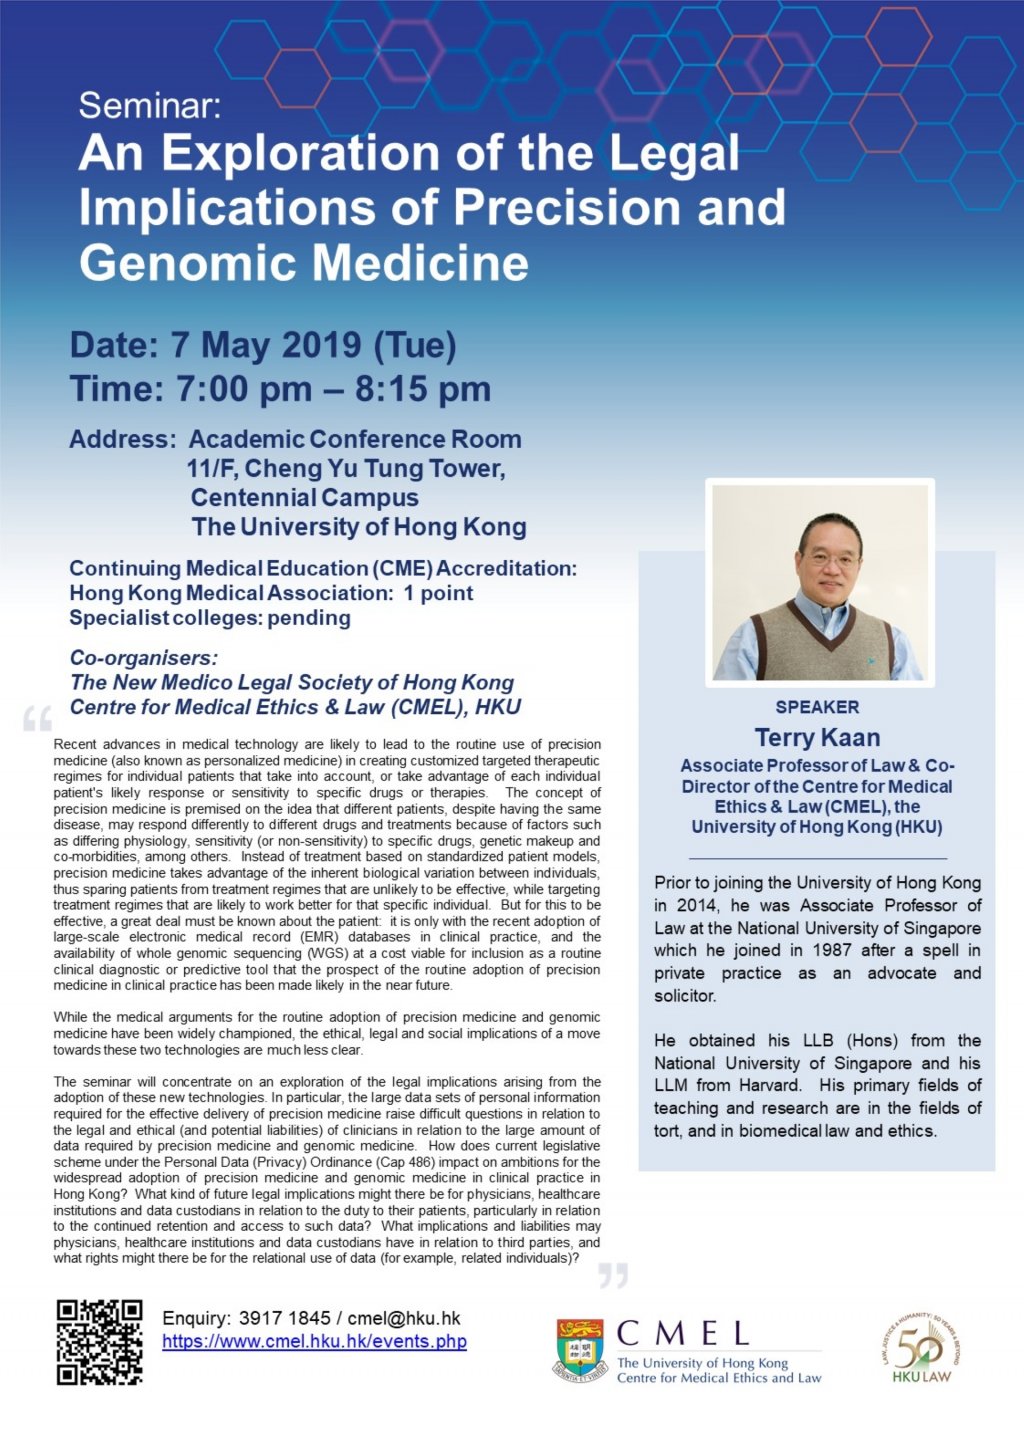 Seminars: An Exploration of the Legal Implications of Precision and Genomic Medicine (7 May, 7pm, 11/F Cheng Yu Tung Tower, CPD)